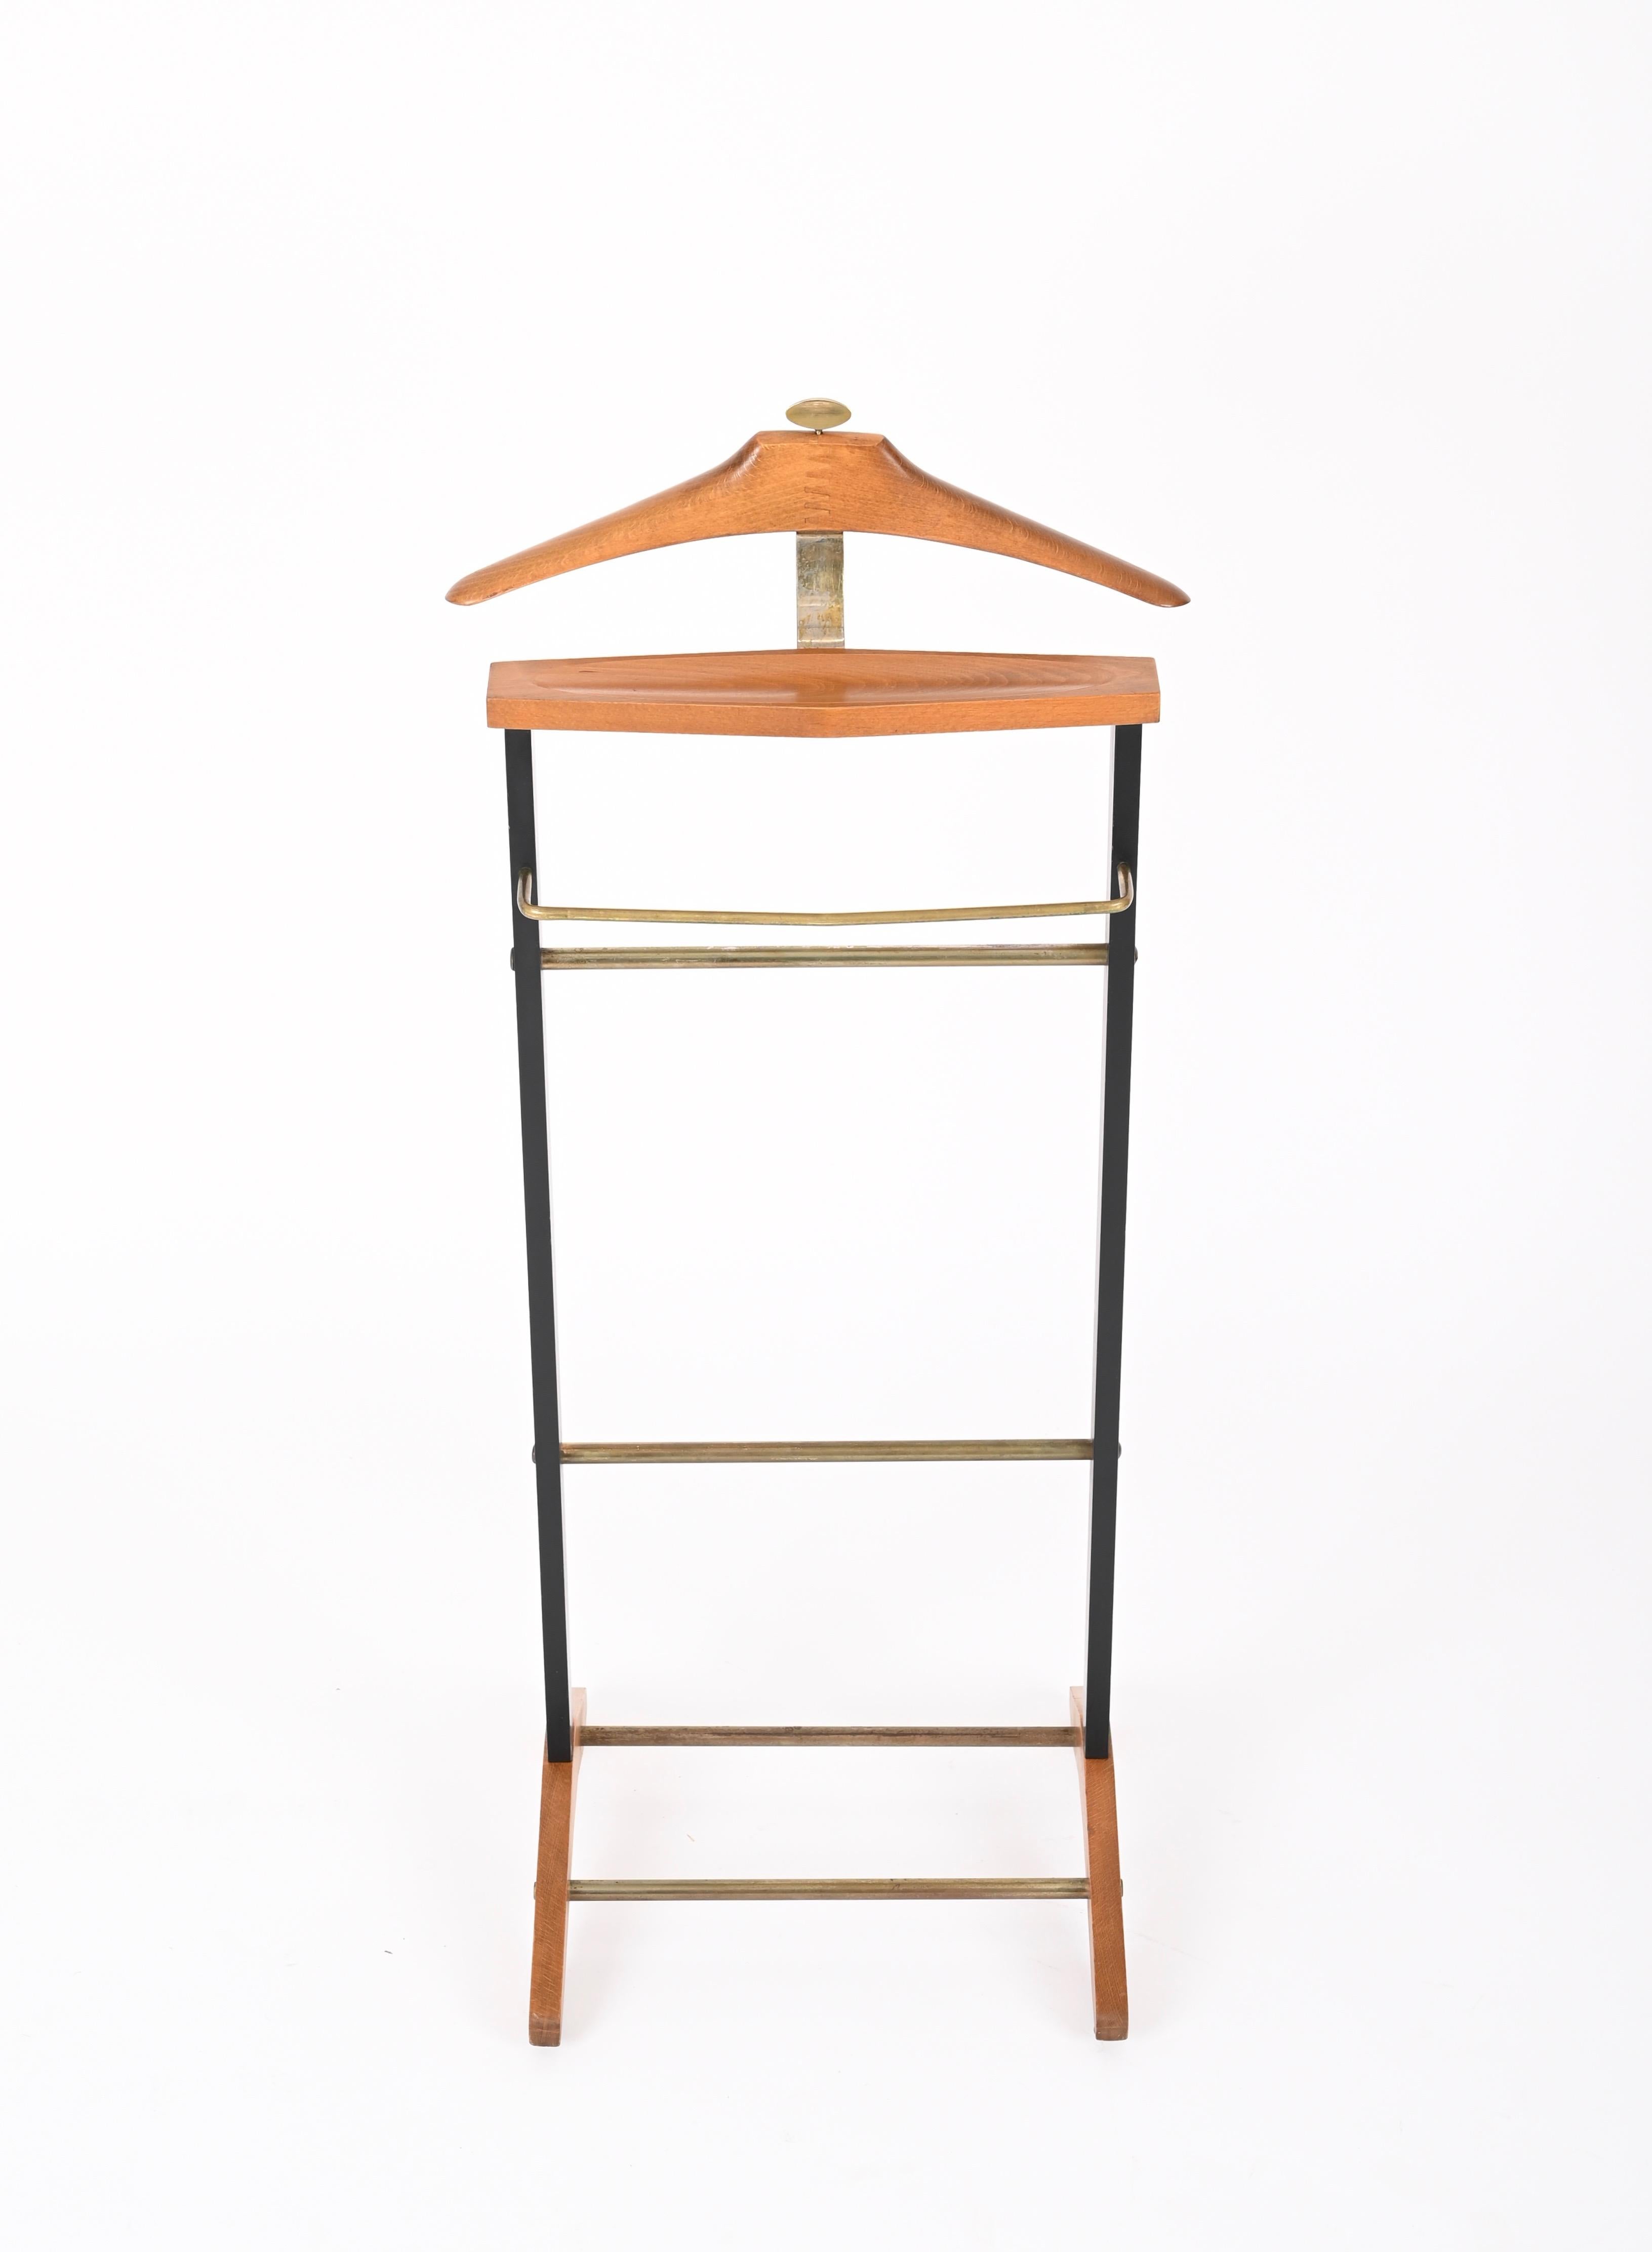 Enameled Ico Parisi Valet Beech and Brass Coat Stand for Fratelli Reguitti, Italy 1960s For Sale